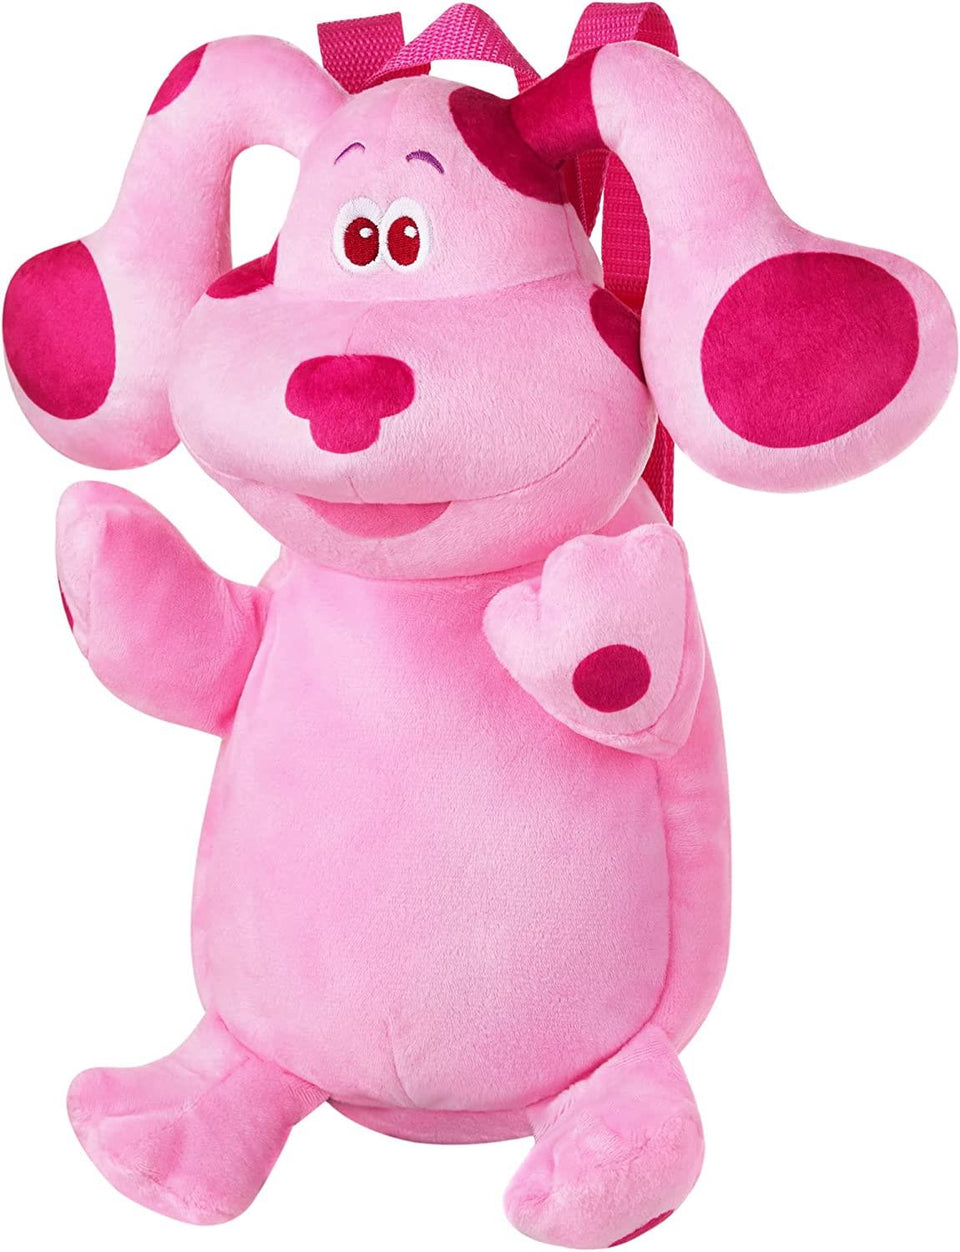 Blue's Clues Magenta Plush Dog Backpack Animated Charactor Nickelodeon Kids Show PMI International